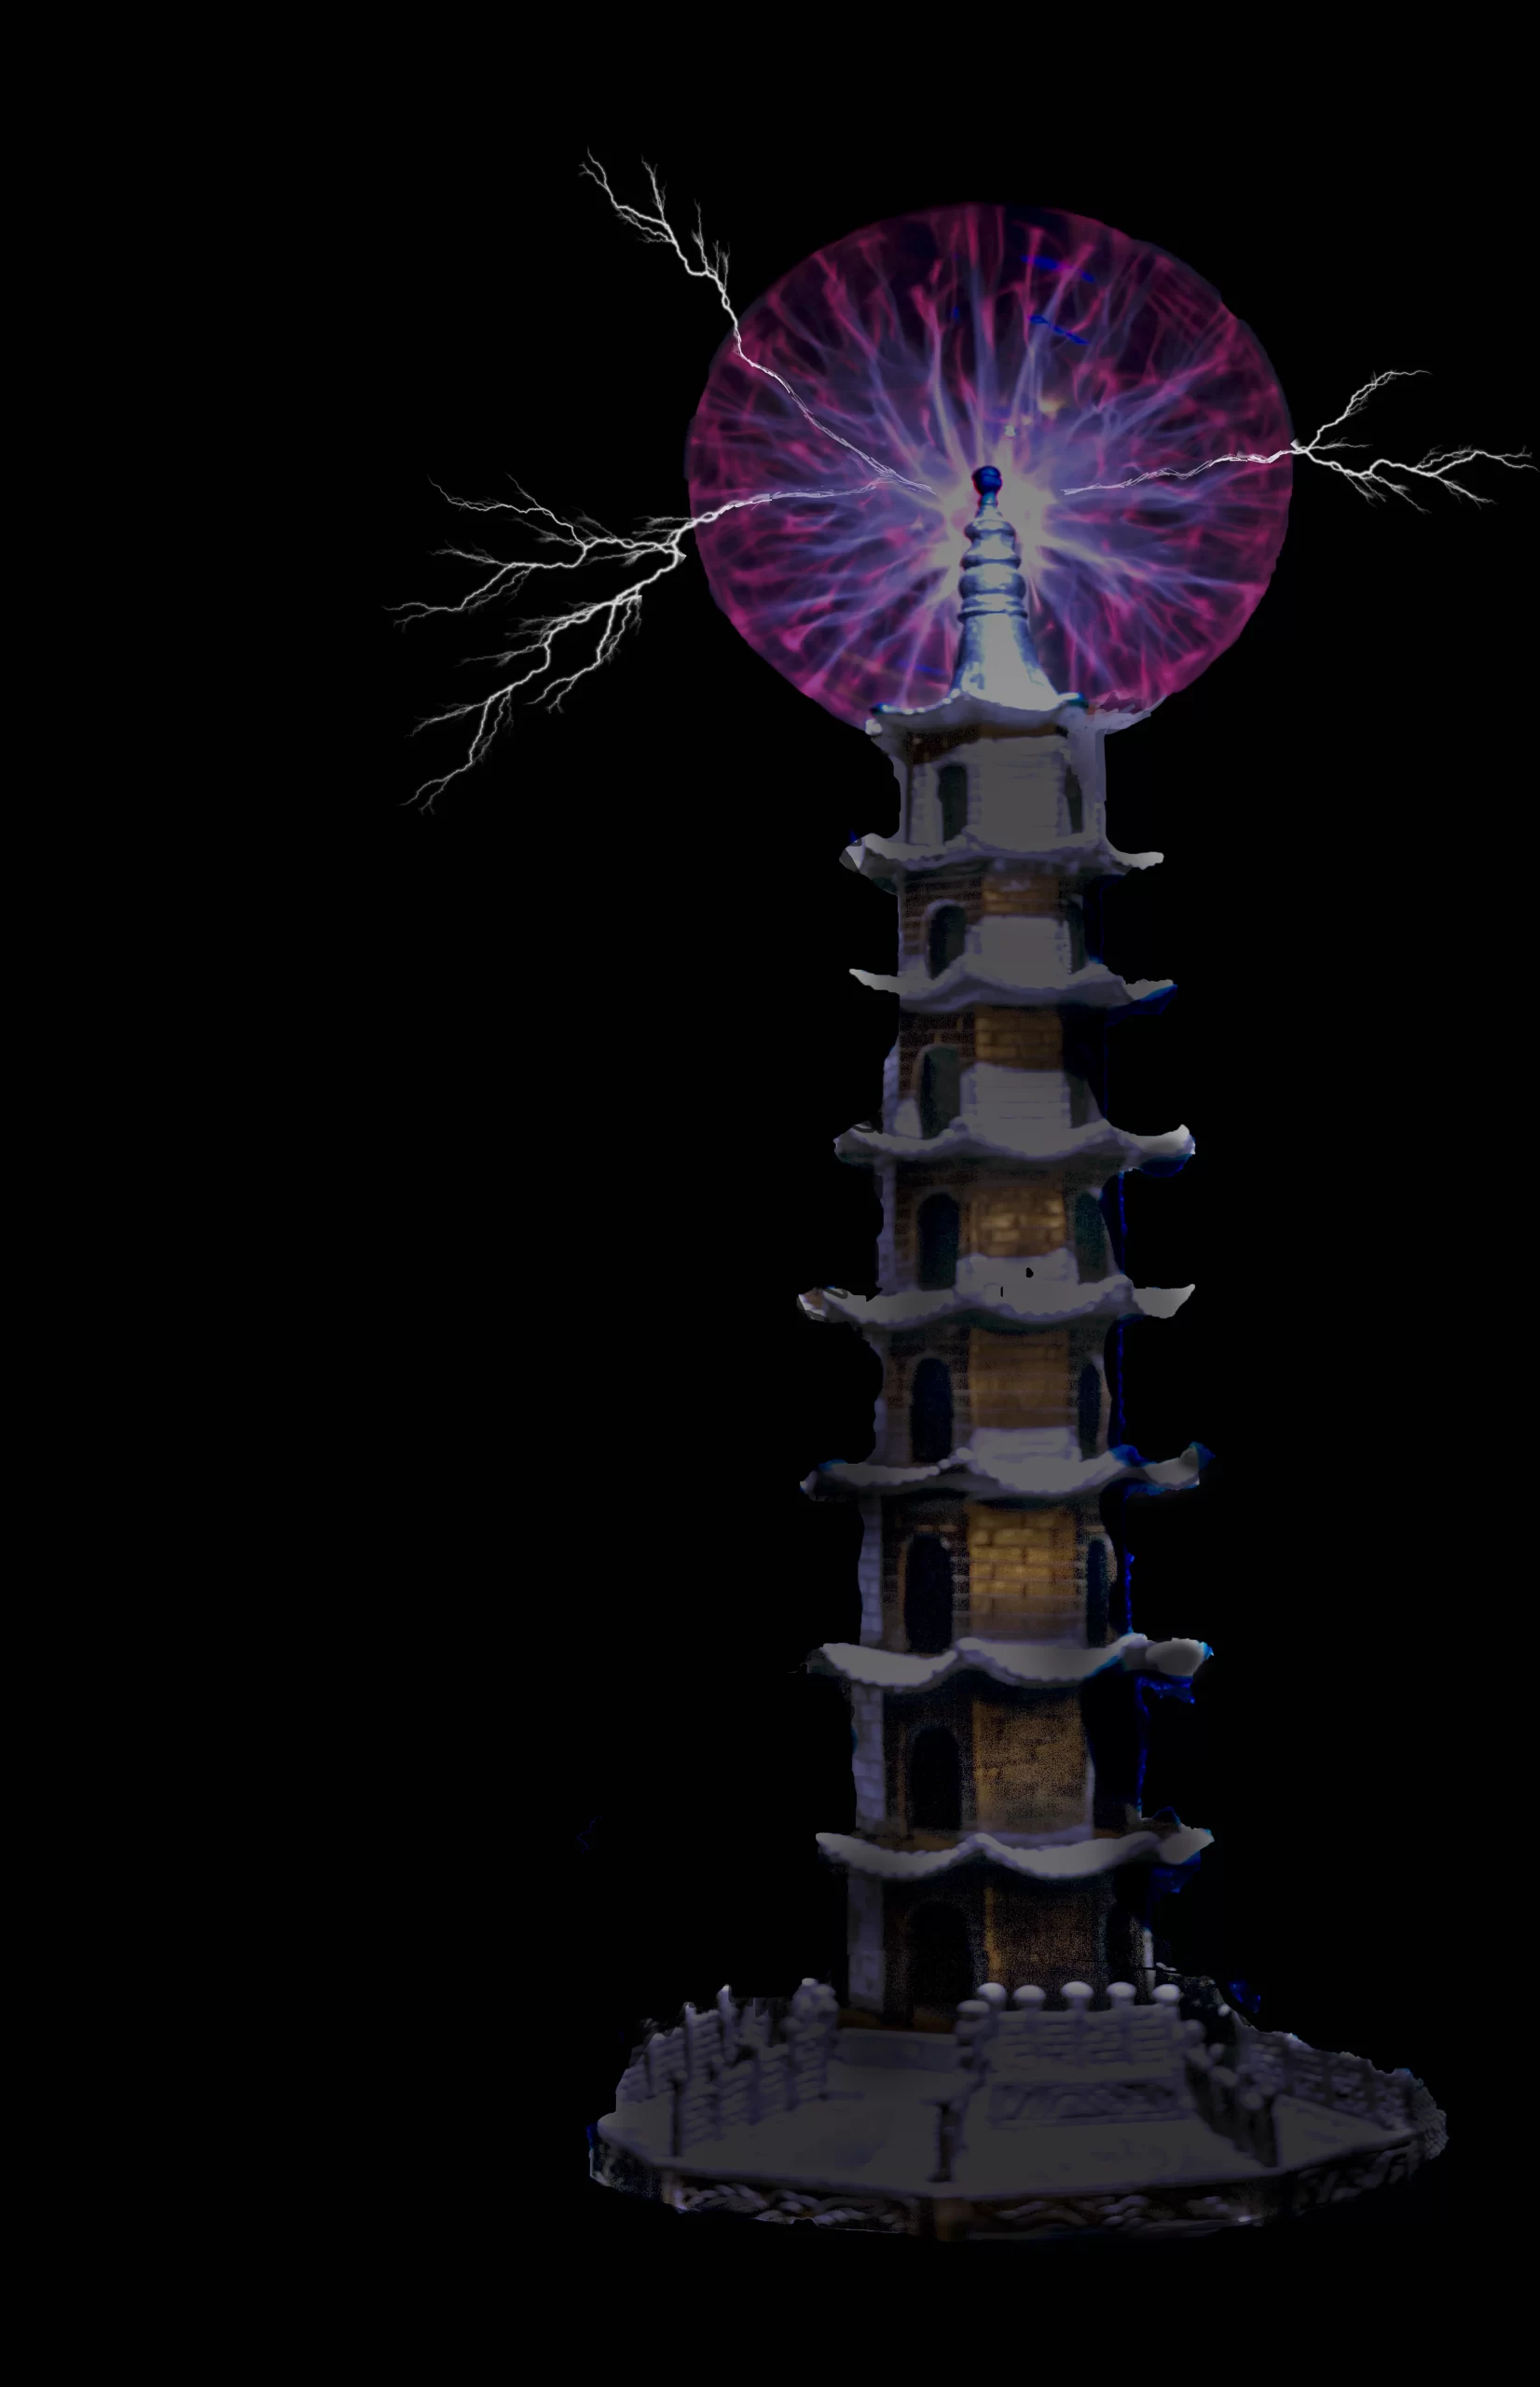 This is a pagoda with ball of energy on top which I want to use for the page background, but the code I have from GP Support truancates it on the right side